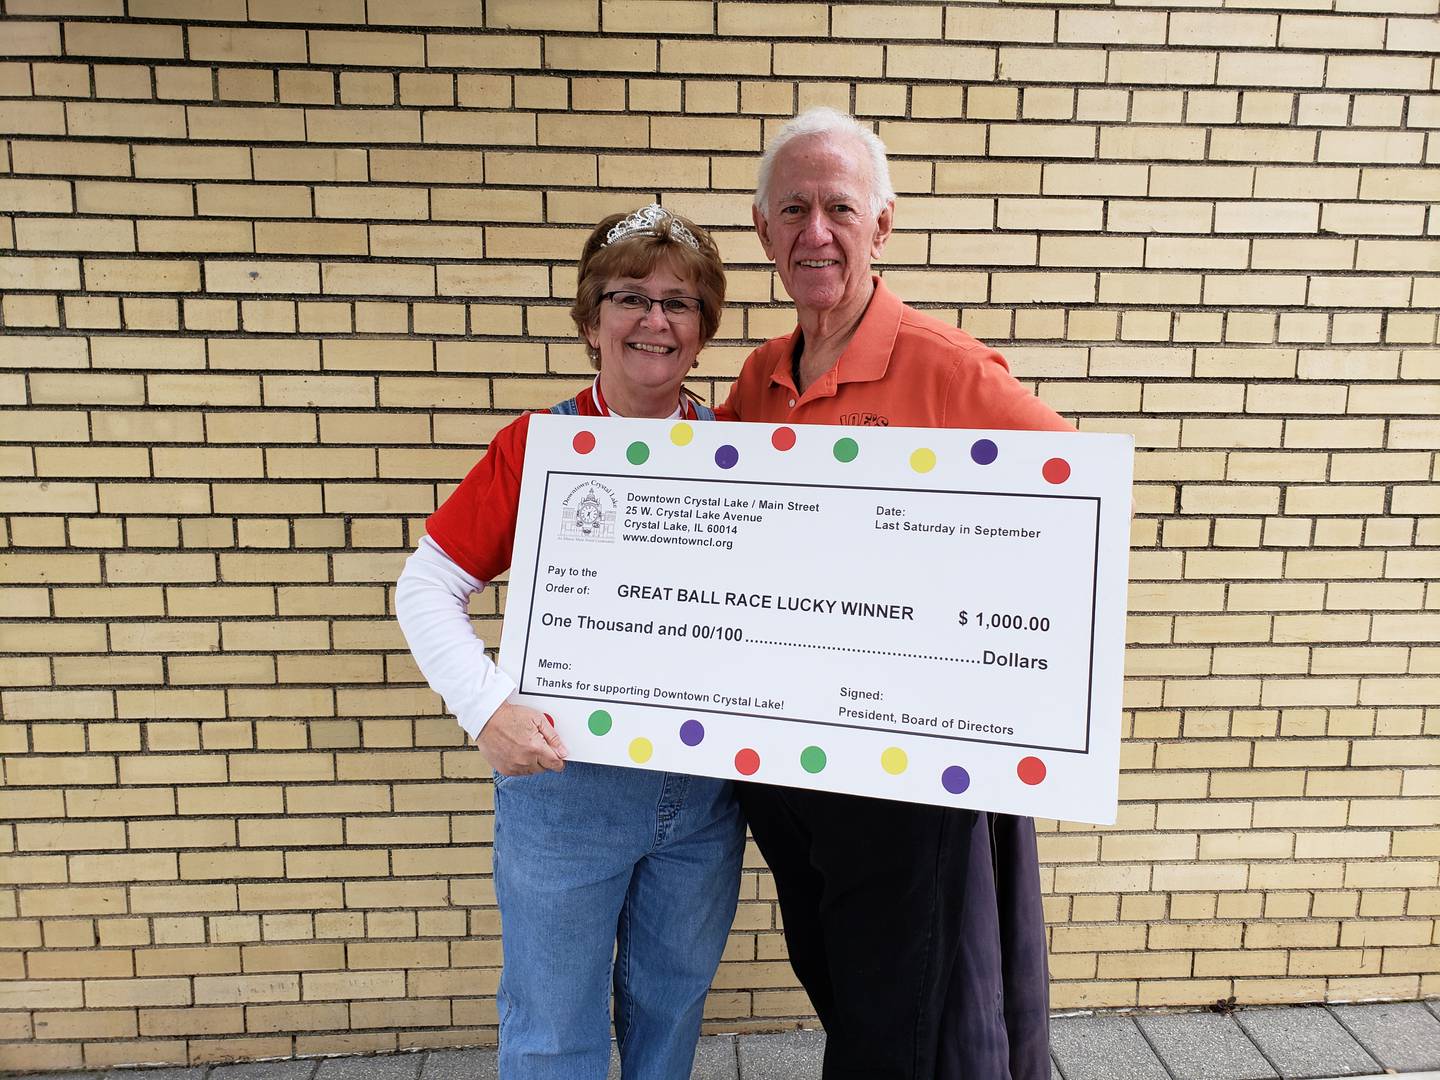 Diana Kenney presents Jack McArdle, winner of the Great Ball Race, with a check in September 2019.